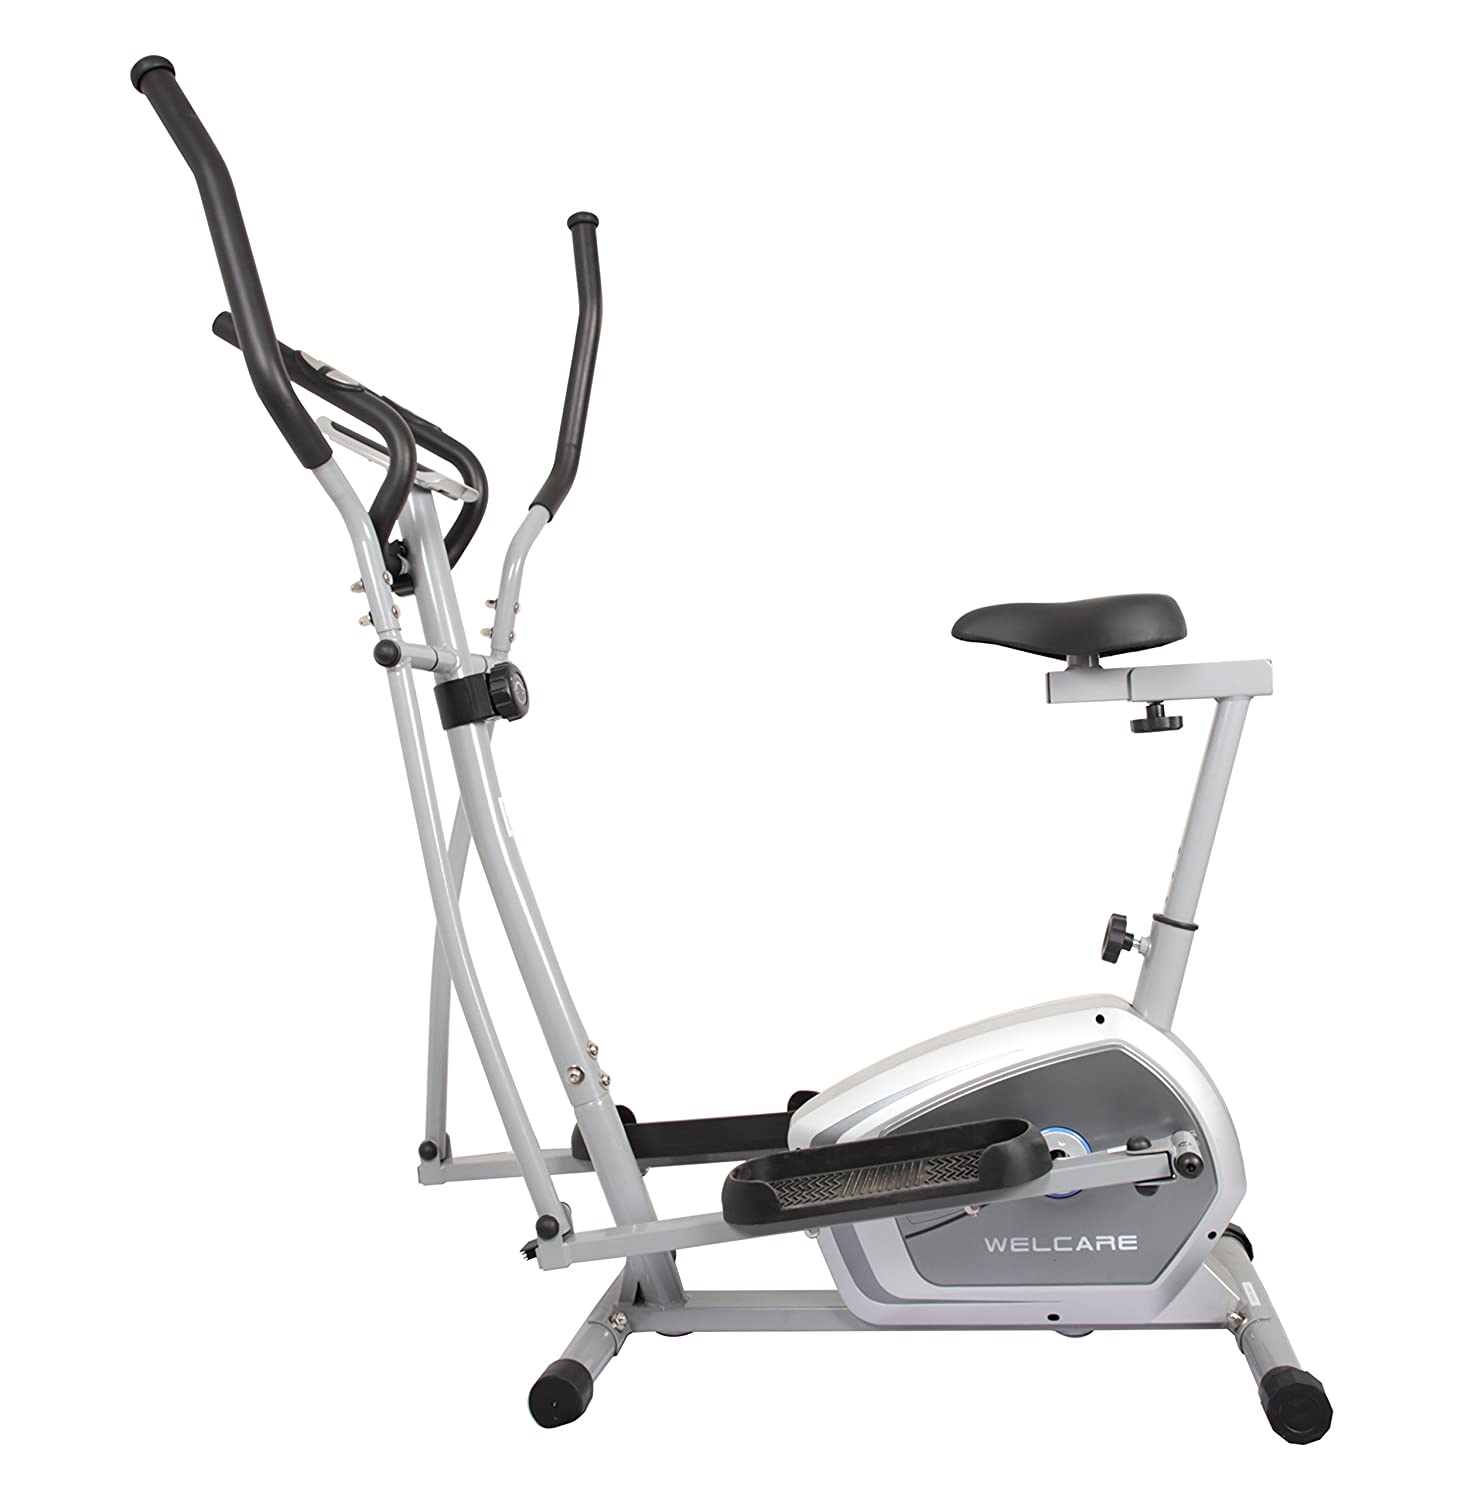 Welcare WC6044 Elliptical review which is the best cross trainer for home use